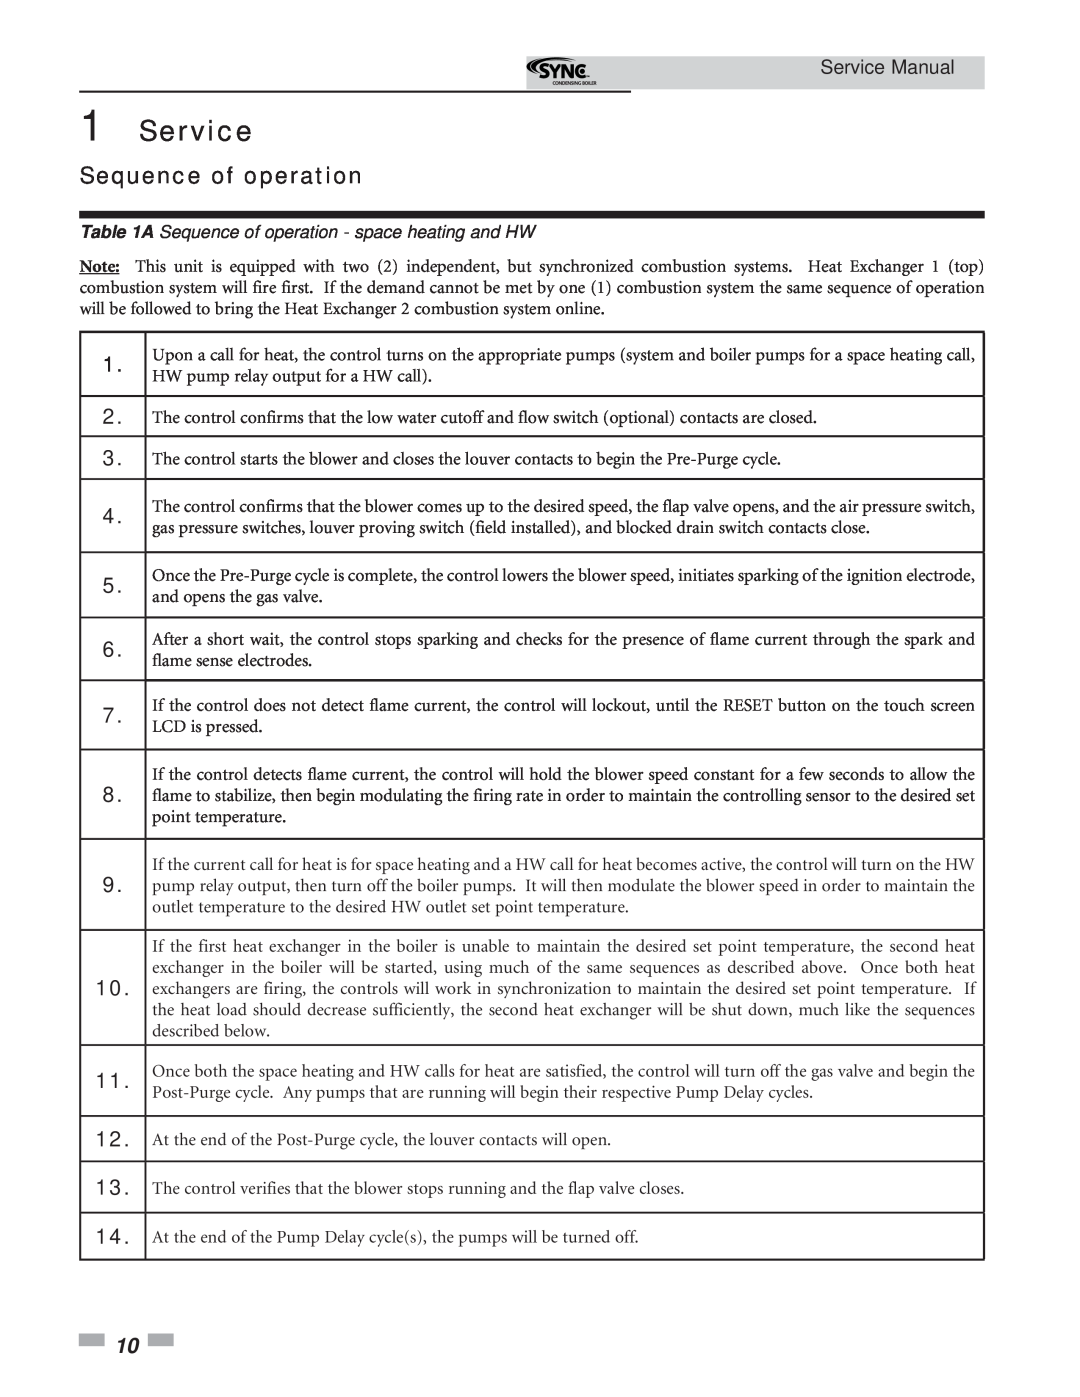 Lochinvar 1.3 service manual Sequence of operation, Service Manual 